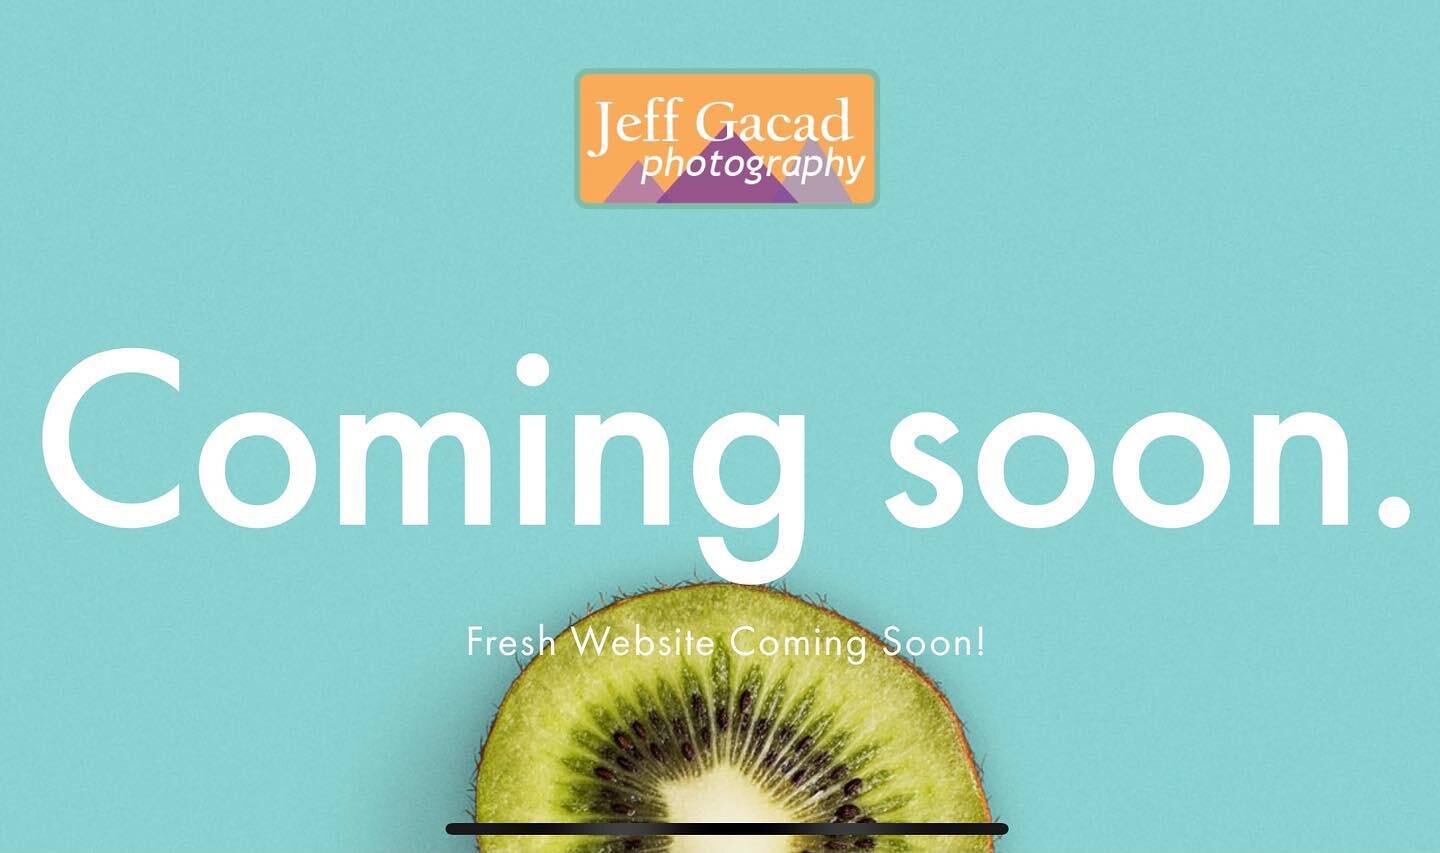 In the process of working on a fresh new website. Stay tuned!
#photographer #photography